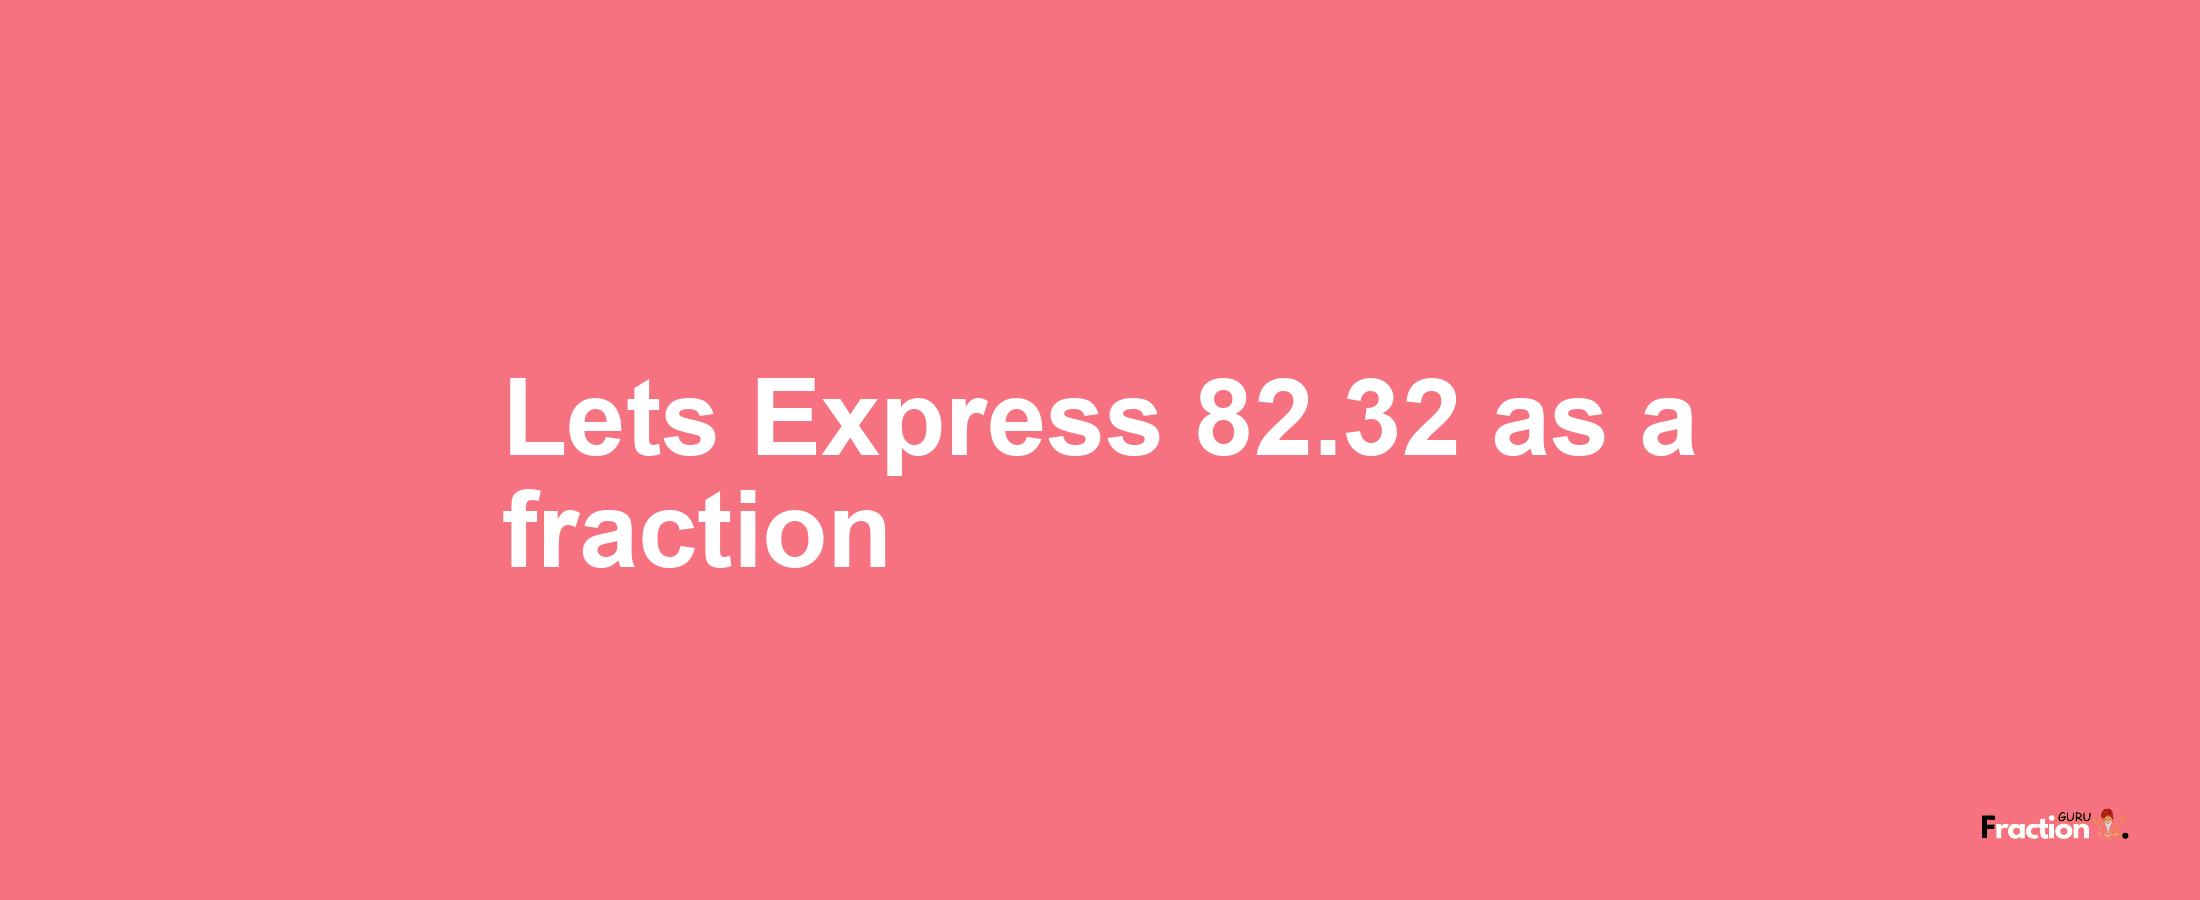 Lets Express 82.32 as afraction